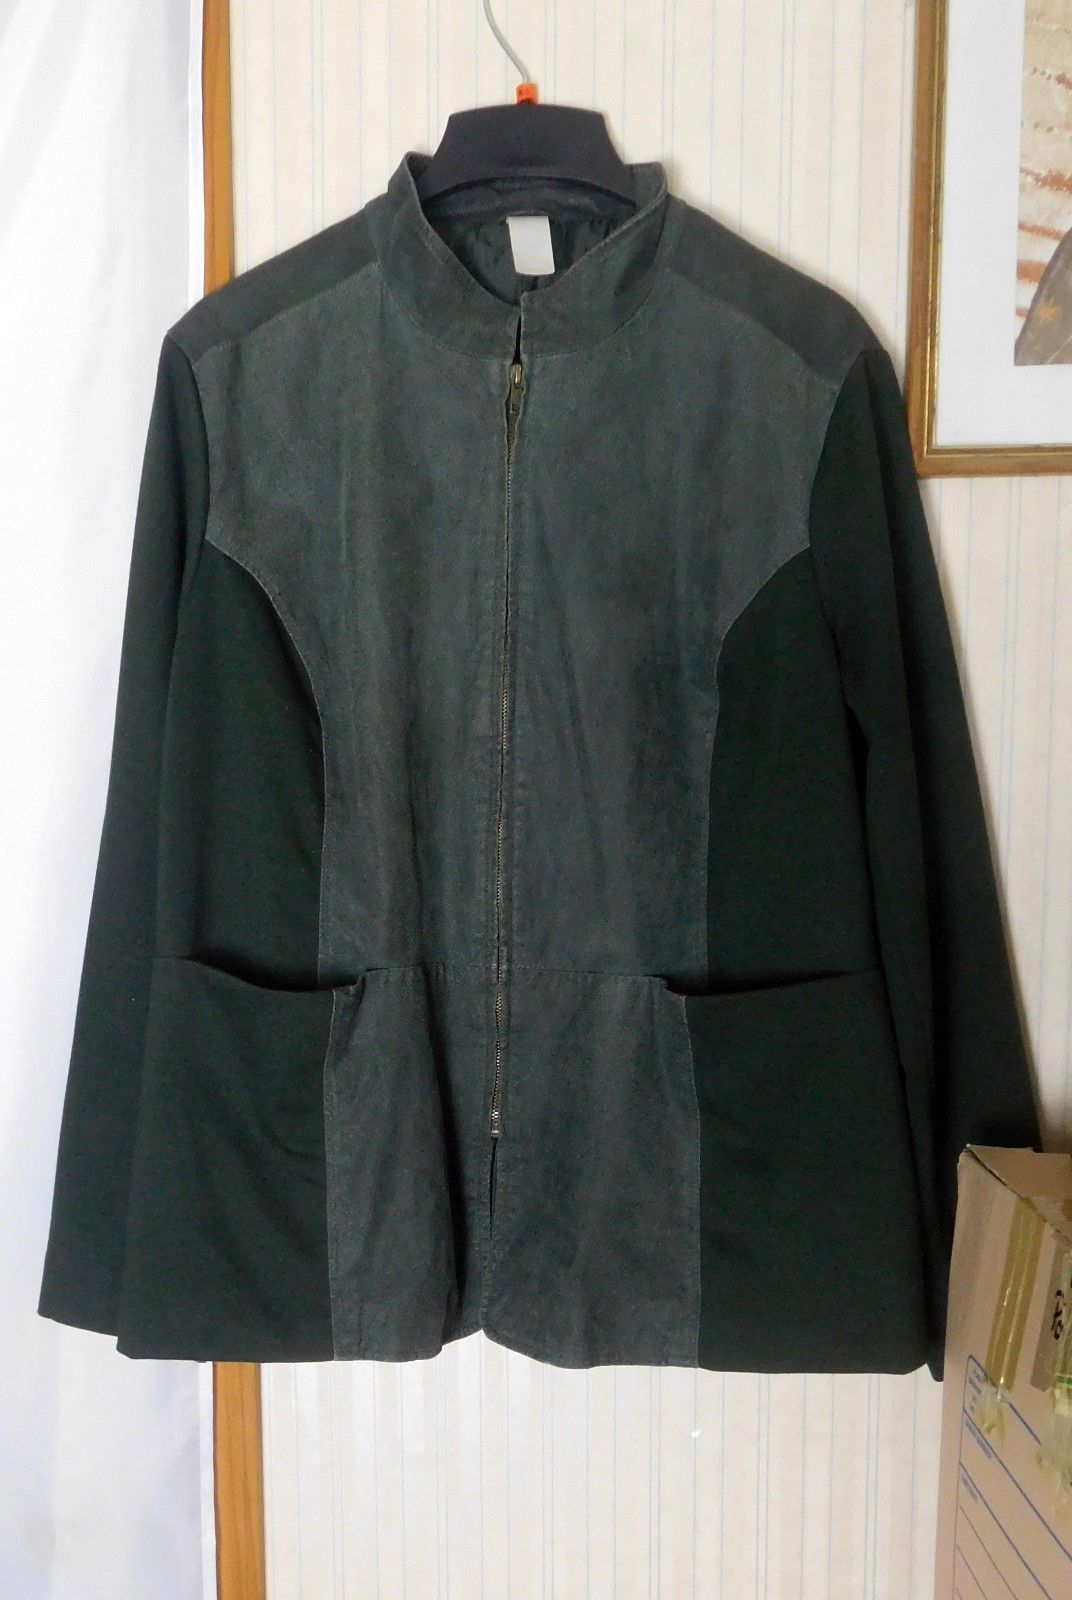 Primary image for Avon Women's Jacket Size 2X - Dark Green Suede & Knit - Full Zip Front - Lined